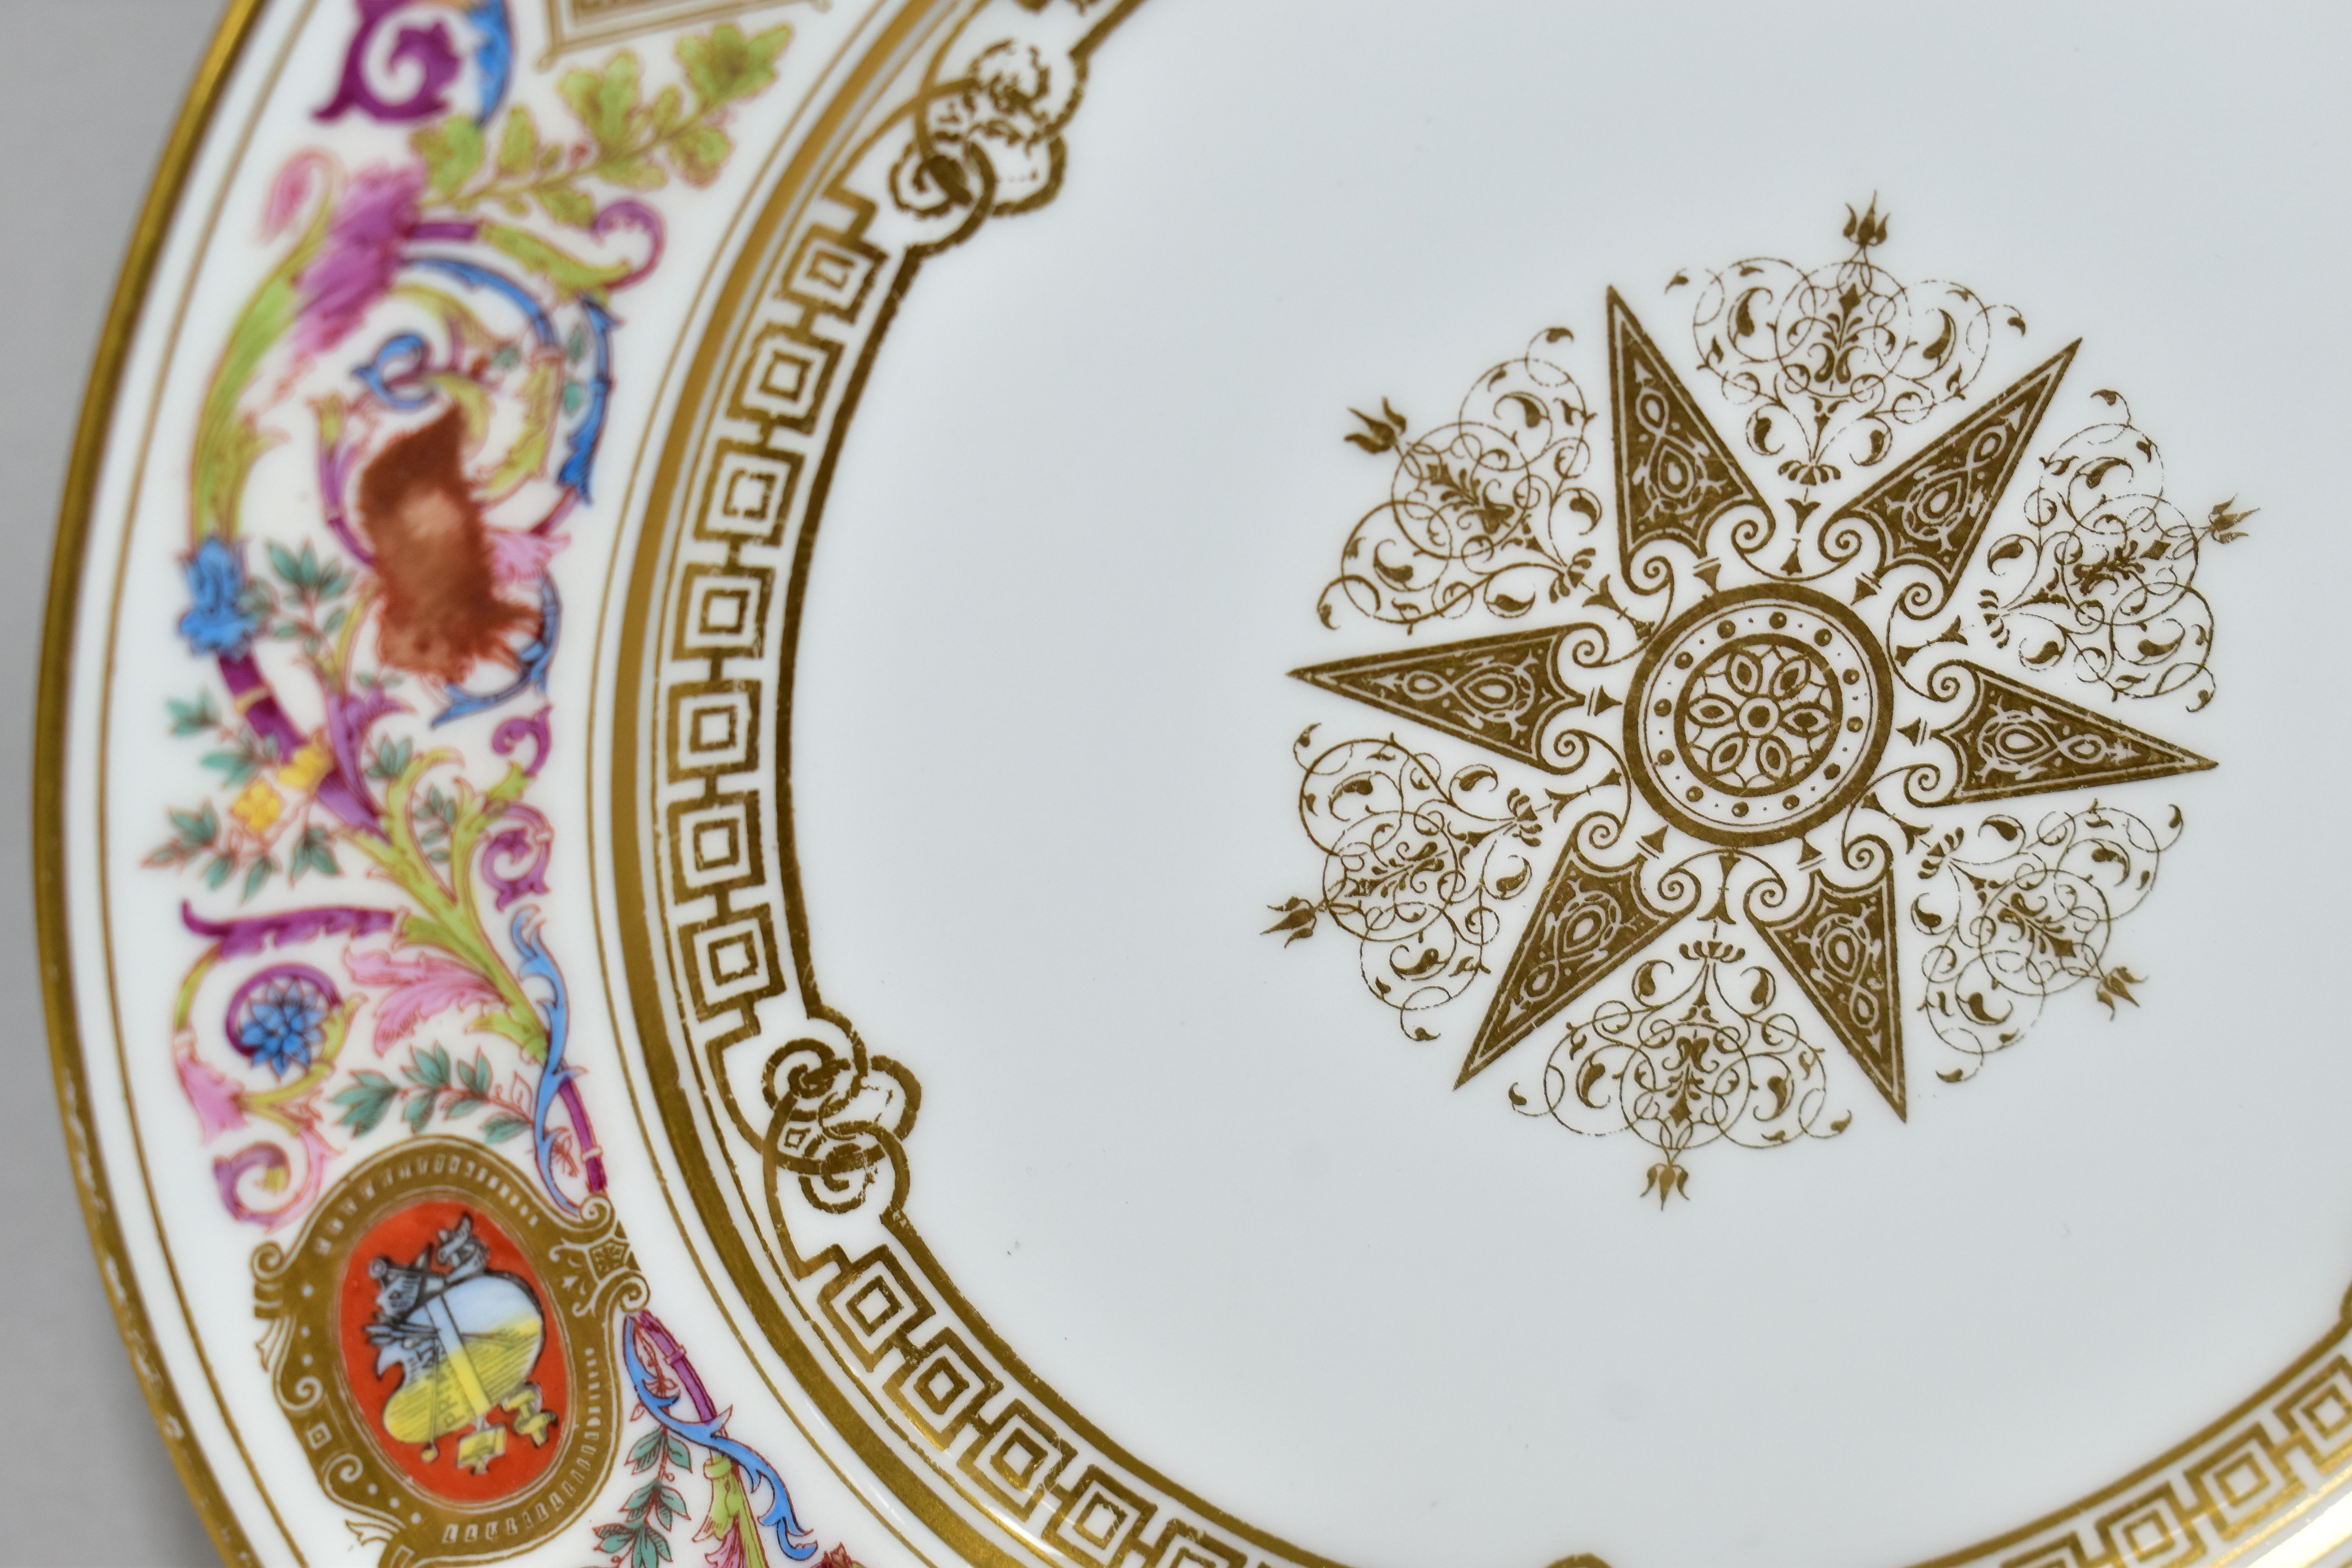 A SEVRES PORCELAIN DESSERT PLATE, from the Royal Hunting Service, featuring a scrolling border - Image 2 of 9